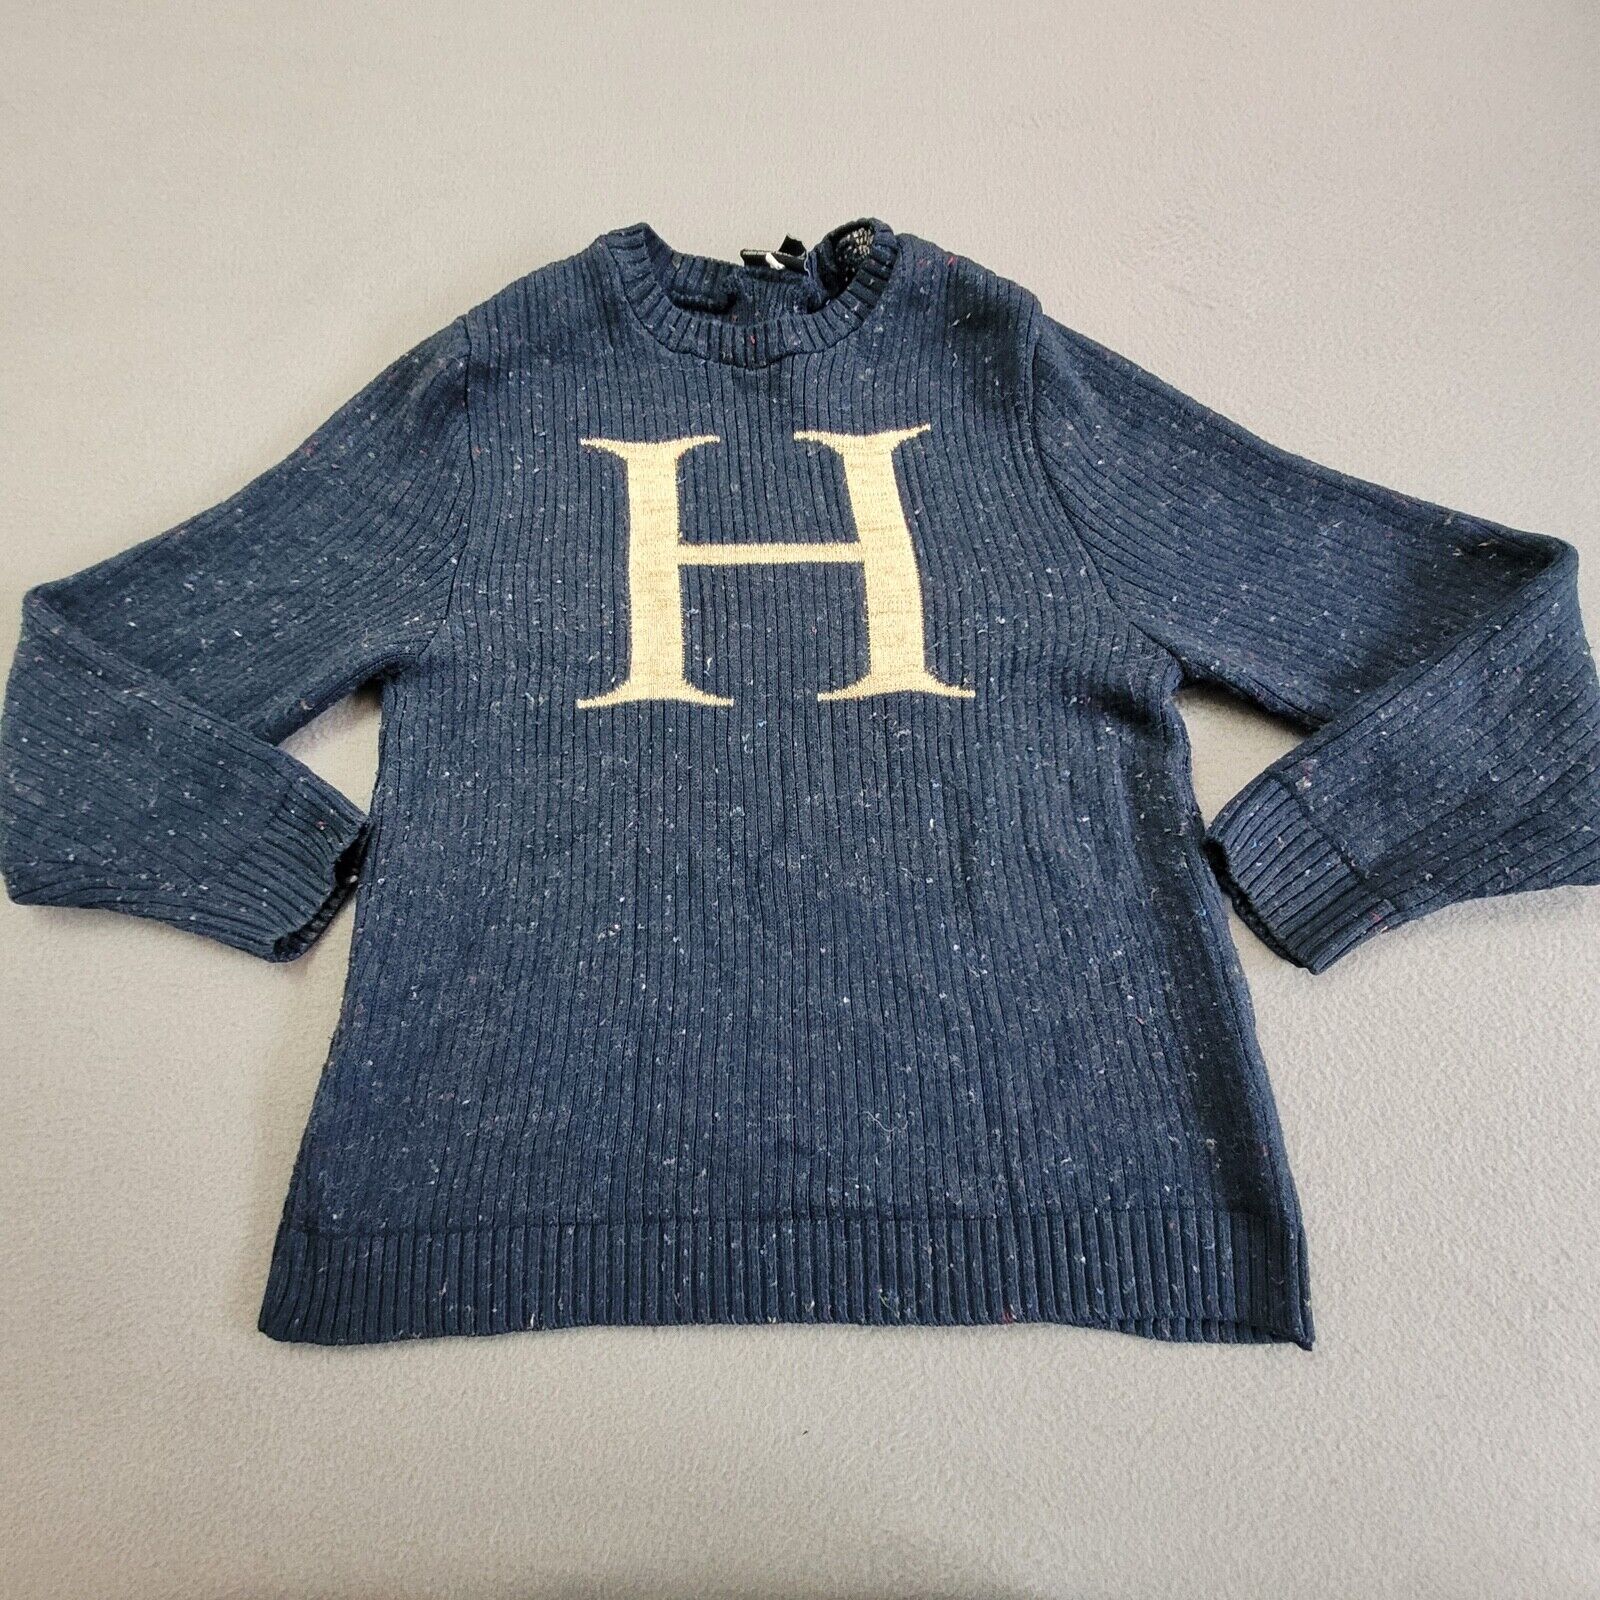 Harry Potter H For Harry Sweater Small Warner Brothers Knit Blue Long Sleeve